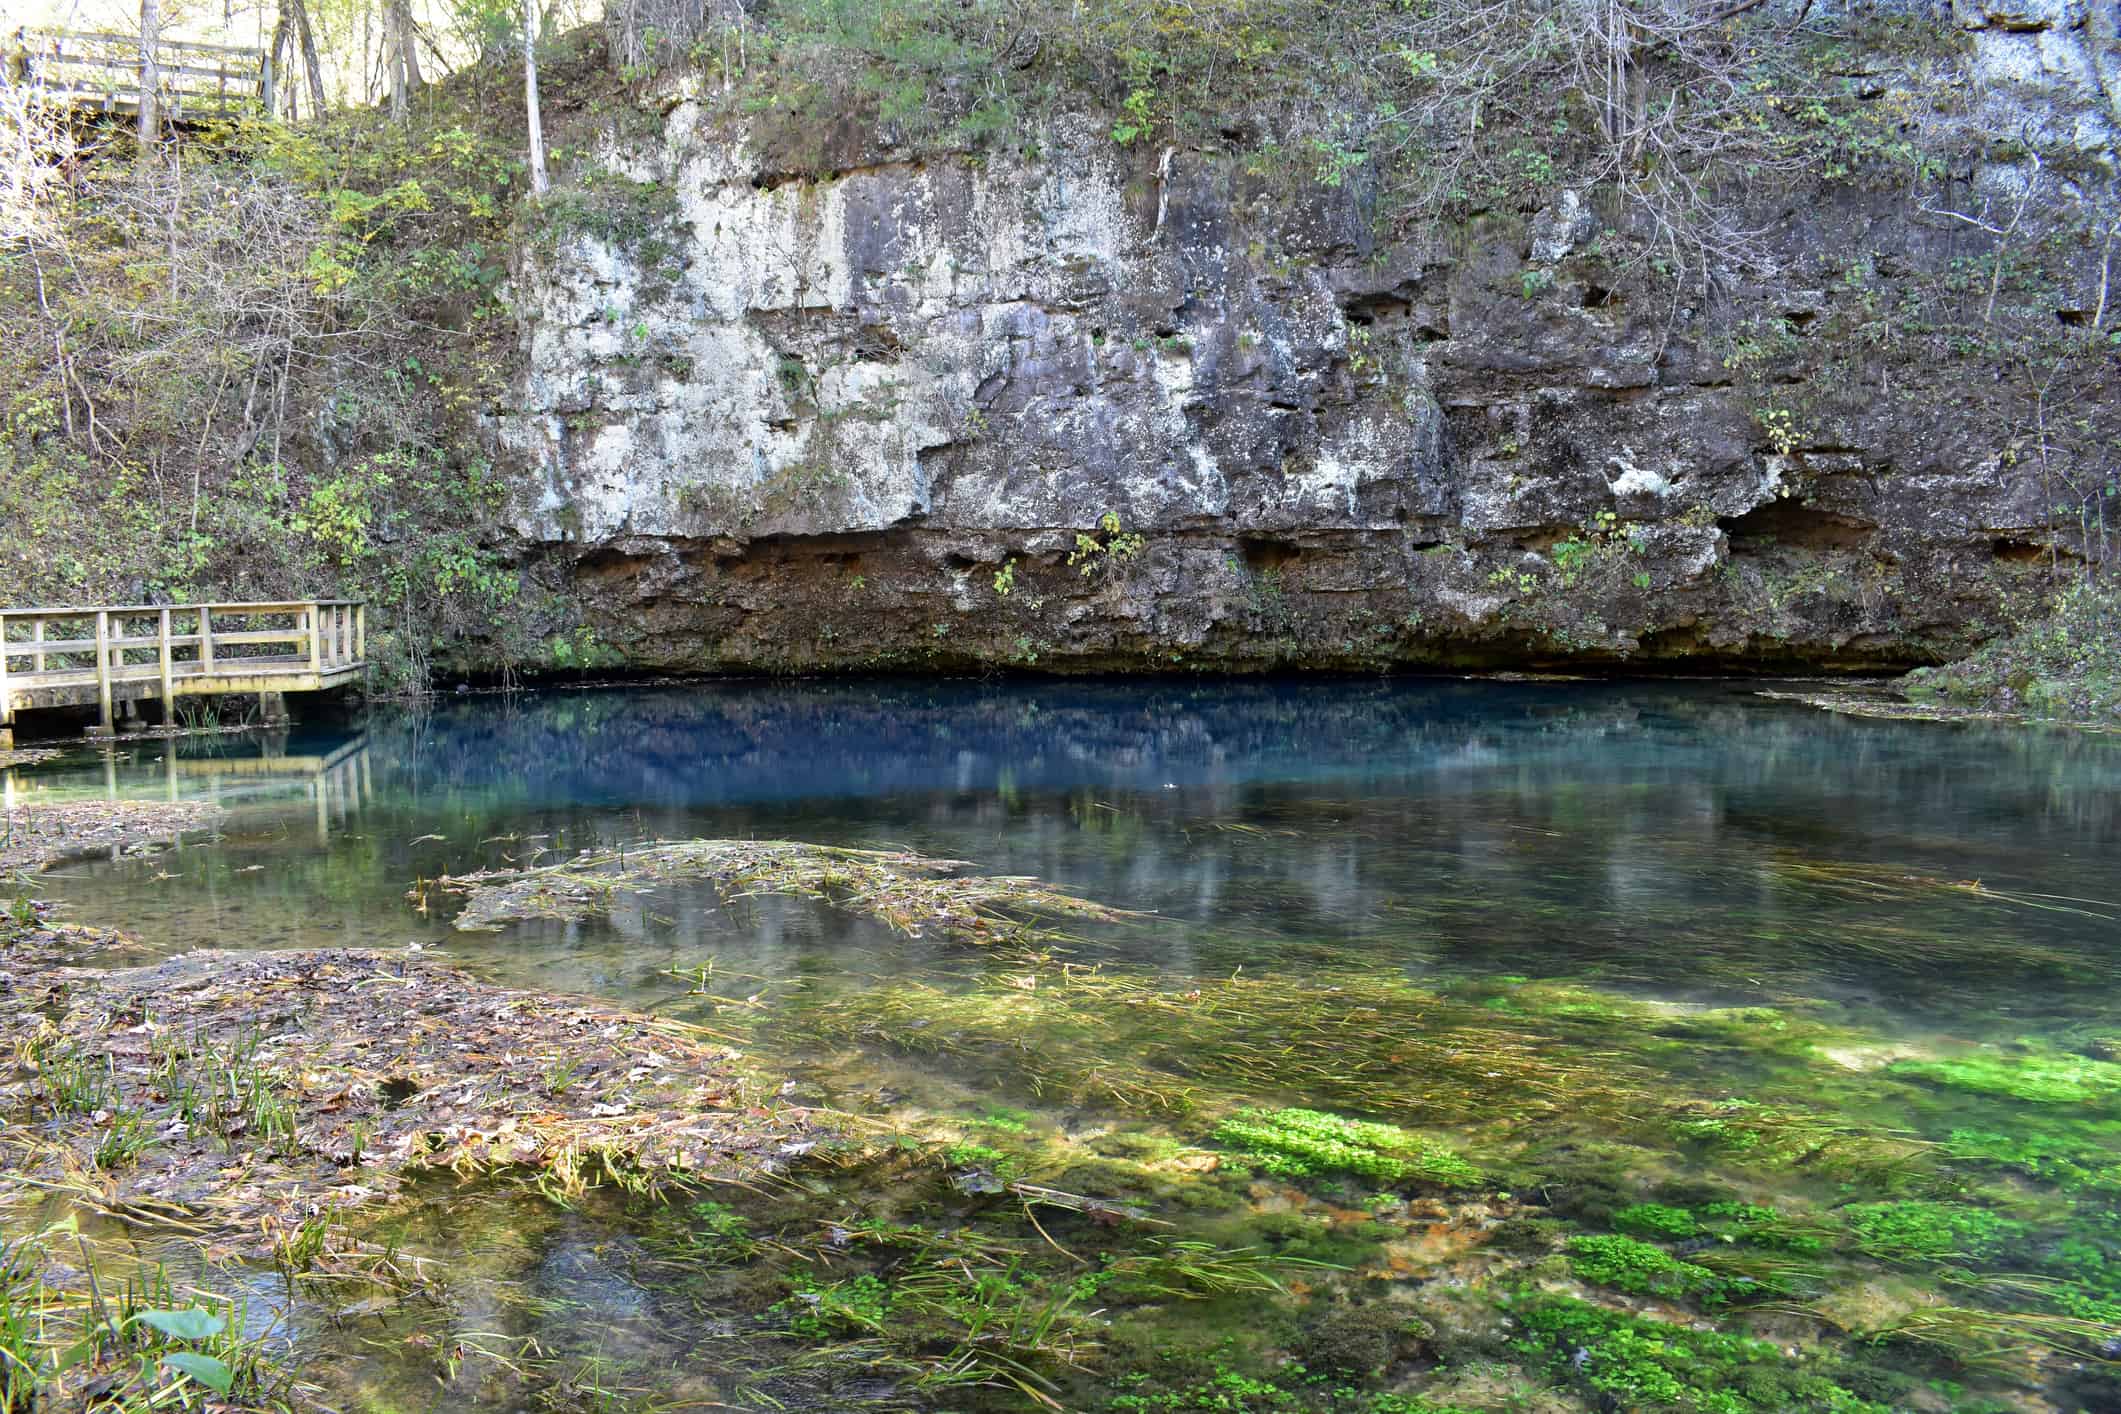 Blue Springs, near Ellington, MO. Located on the Current River